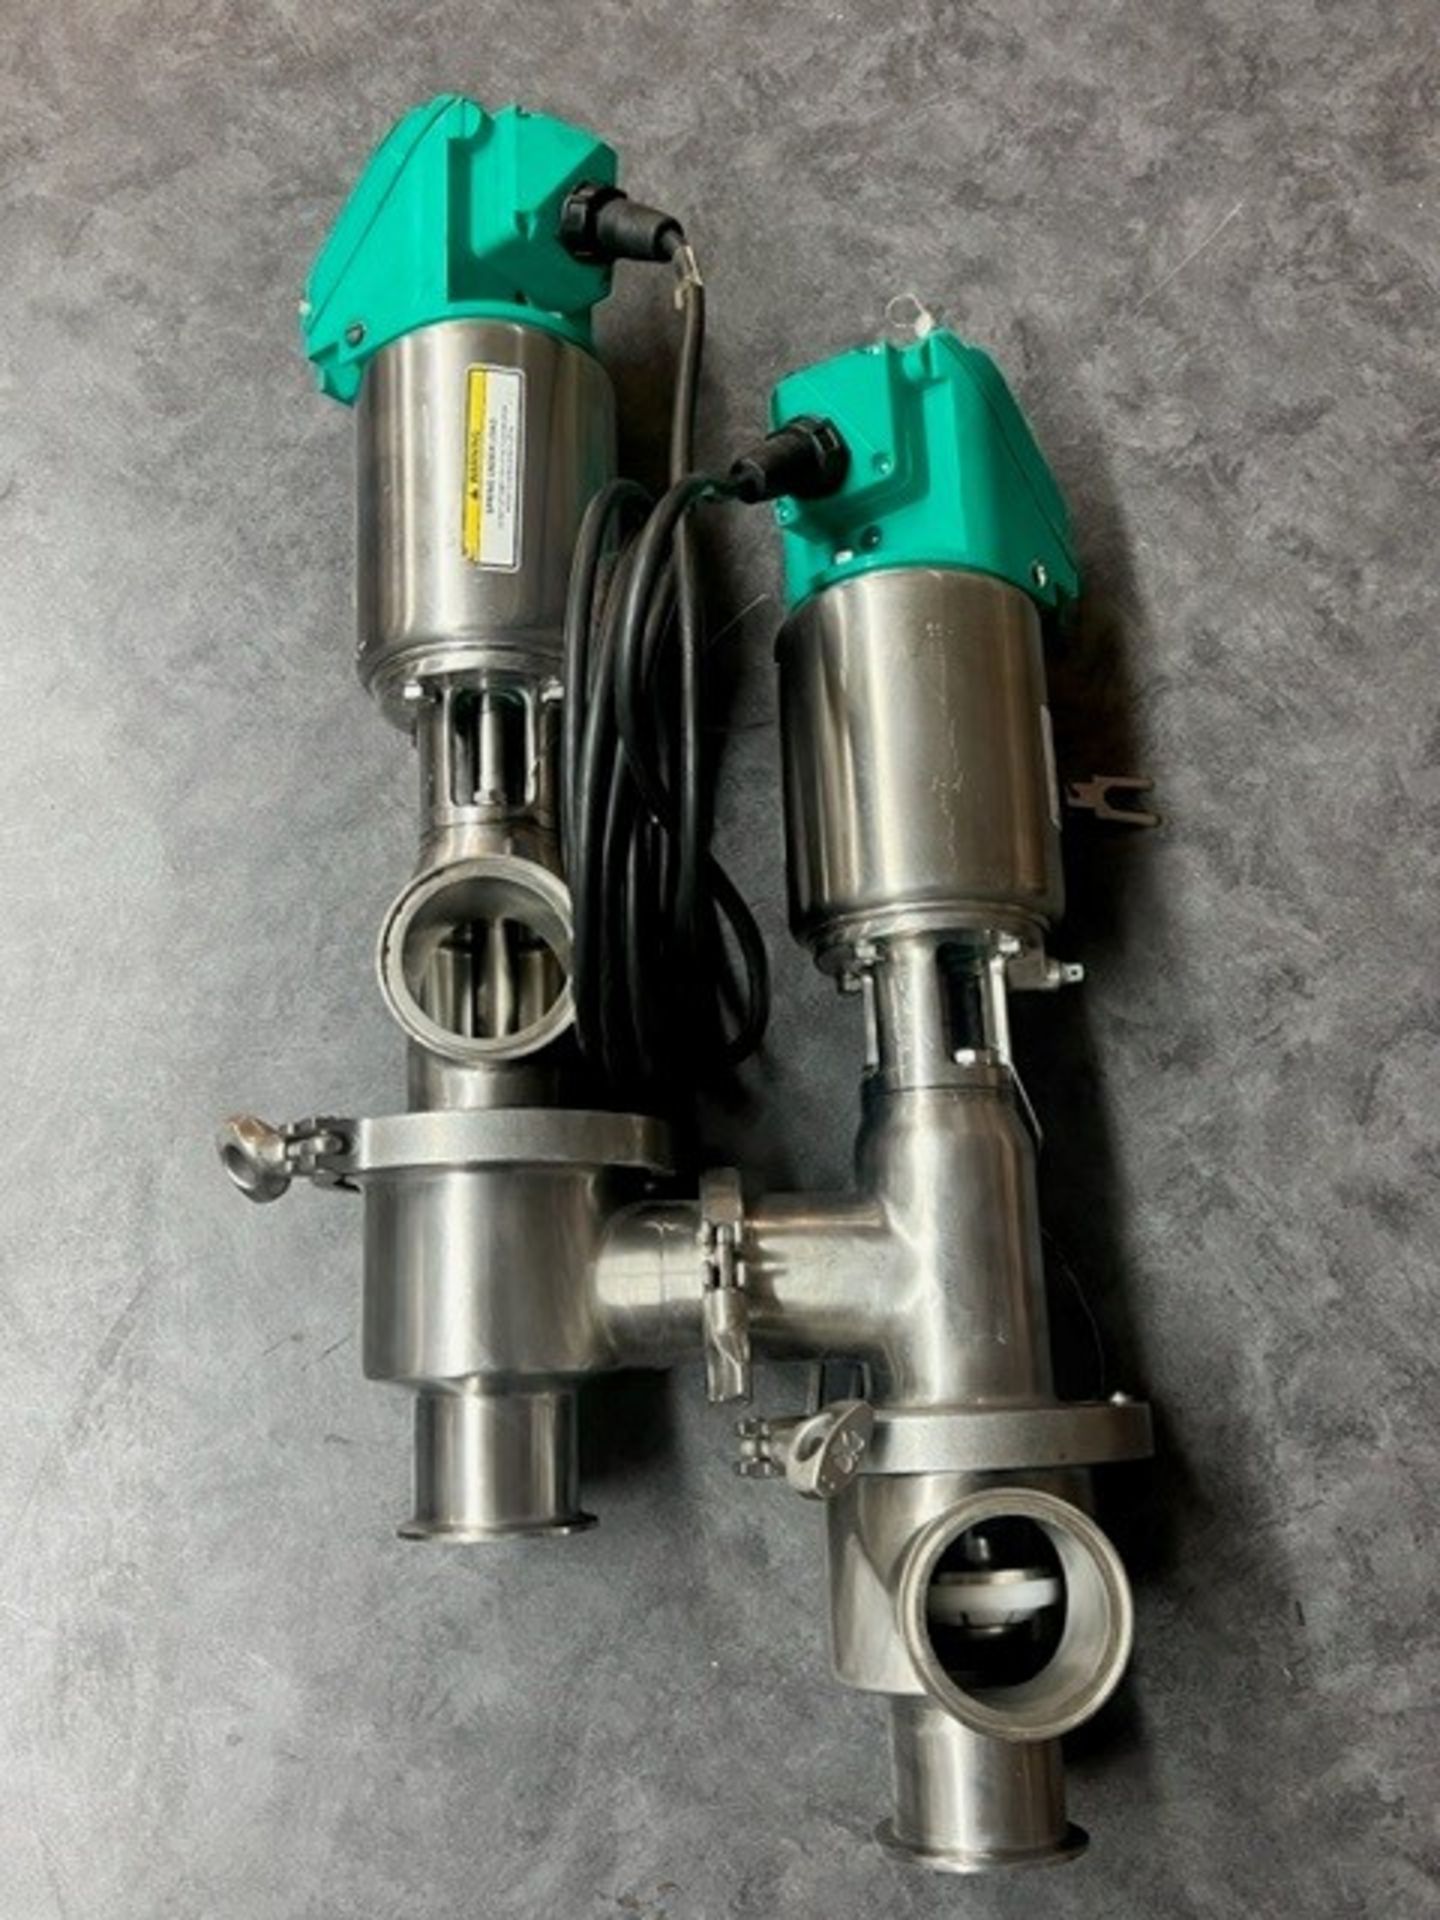 Tri-Clover 2.5" Stainless Diversion Set, Model 762 with Teflon Stem and Legal Control Box with - Image 2 of 7